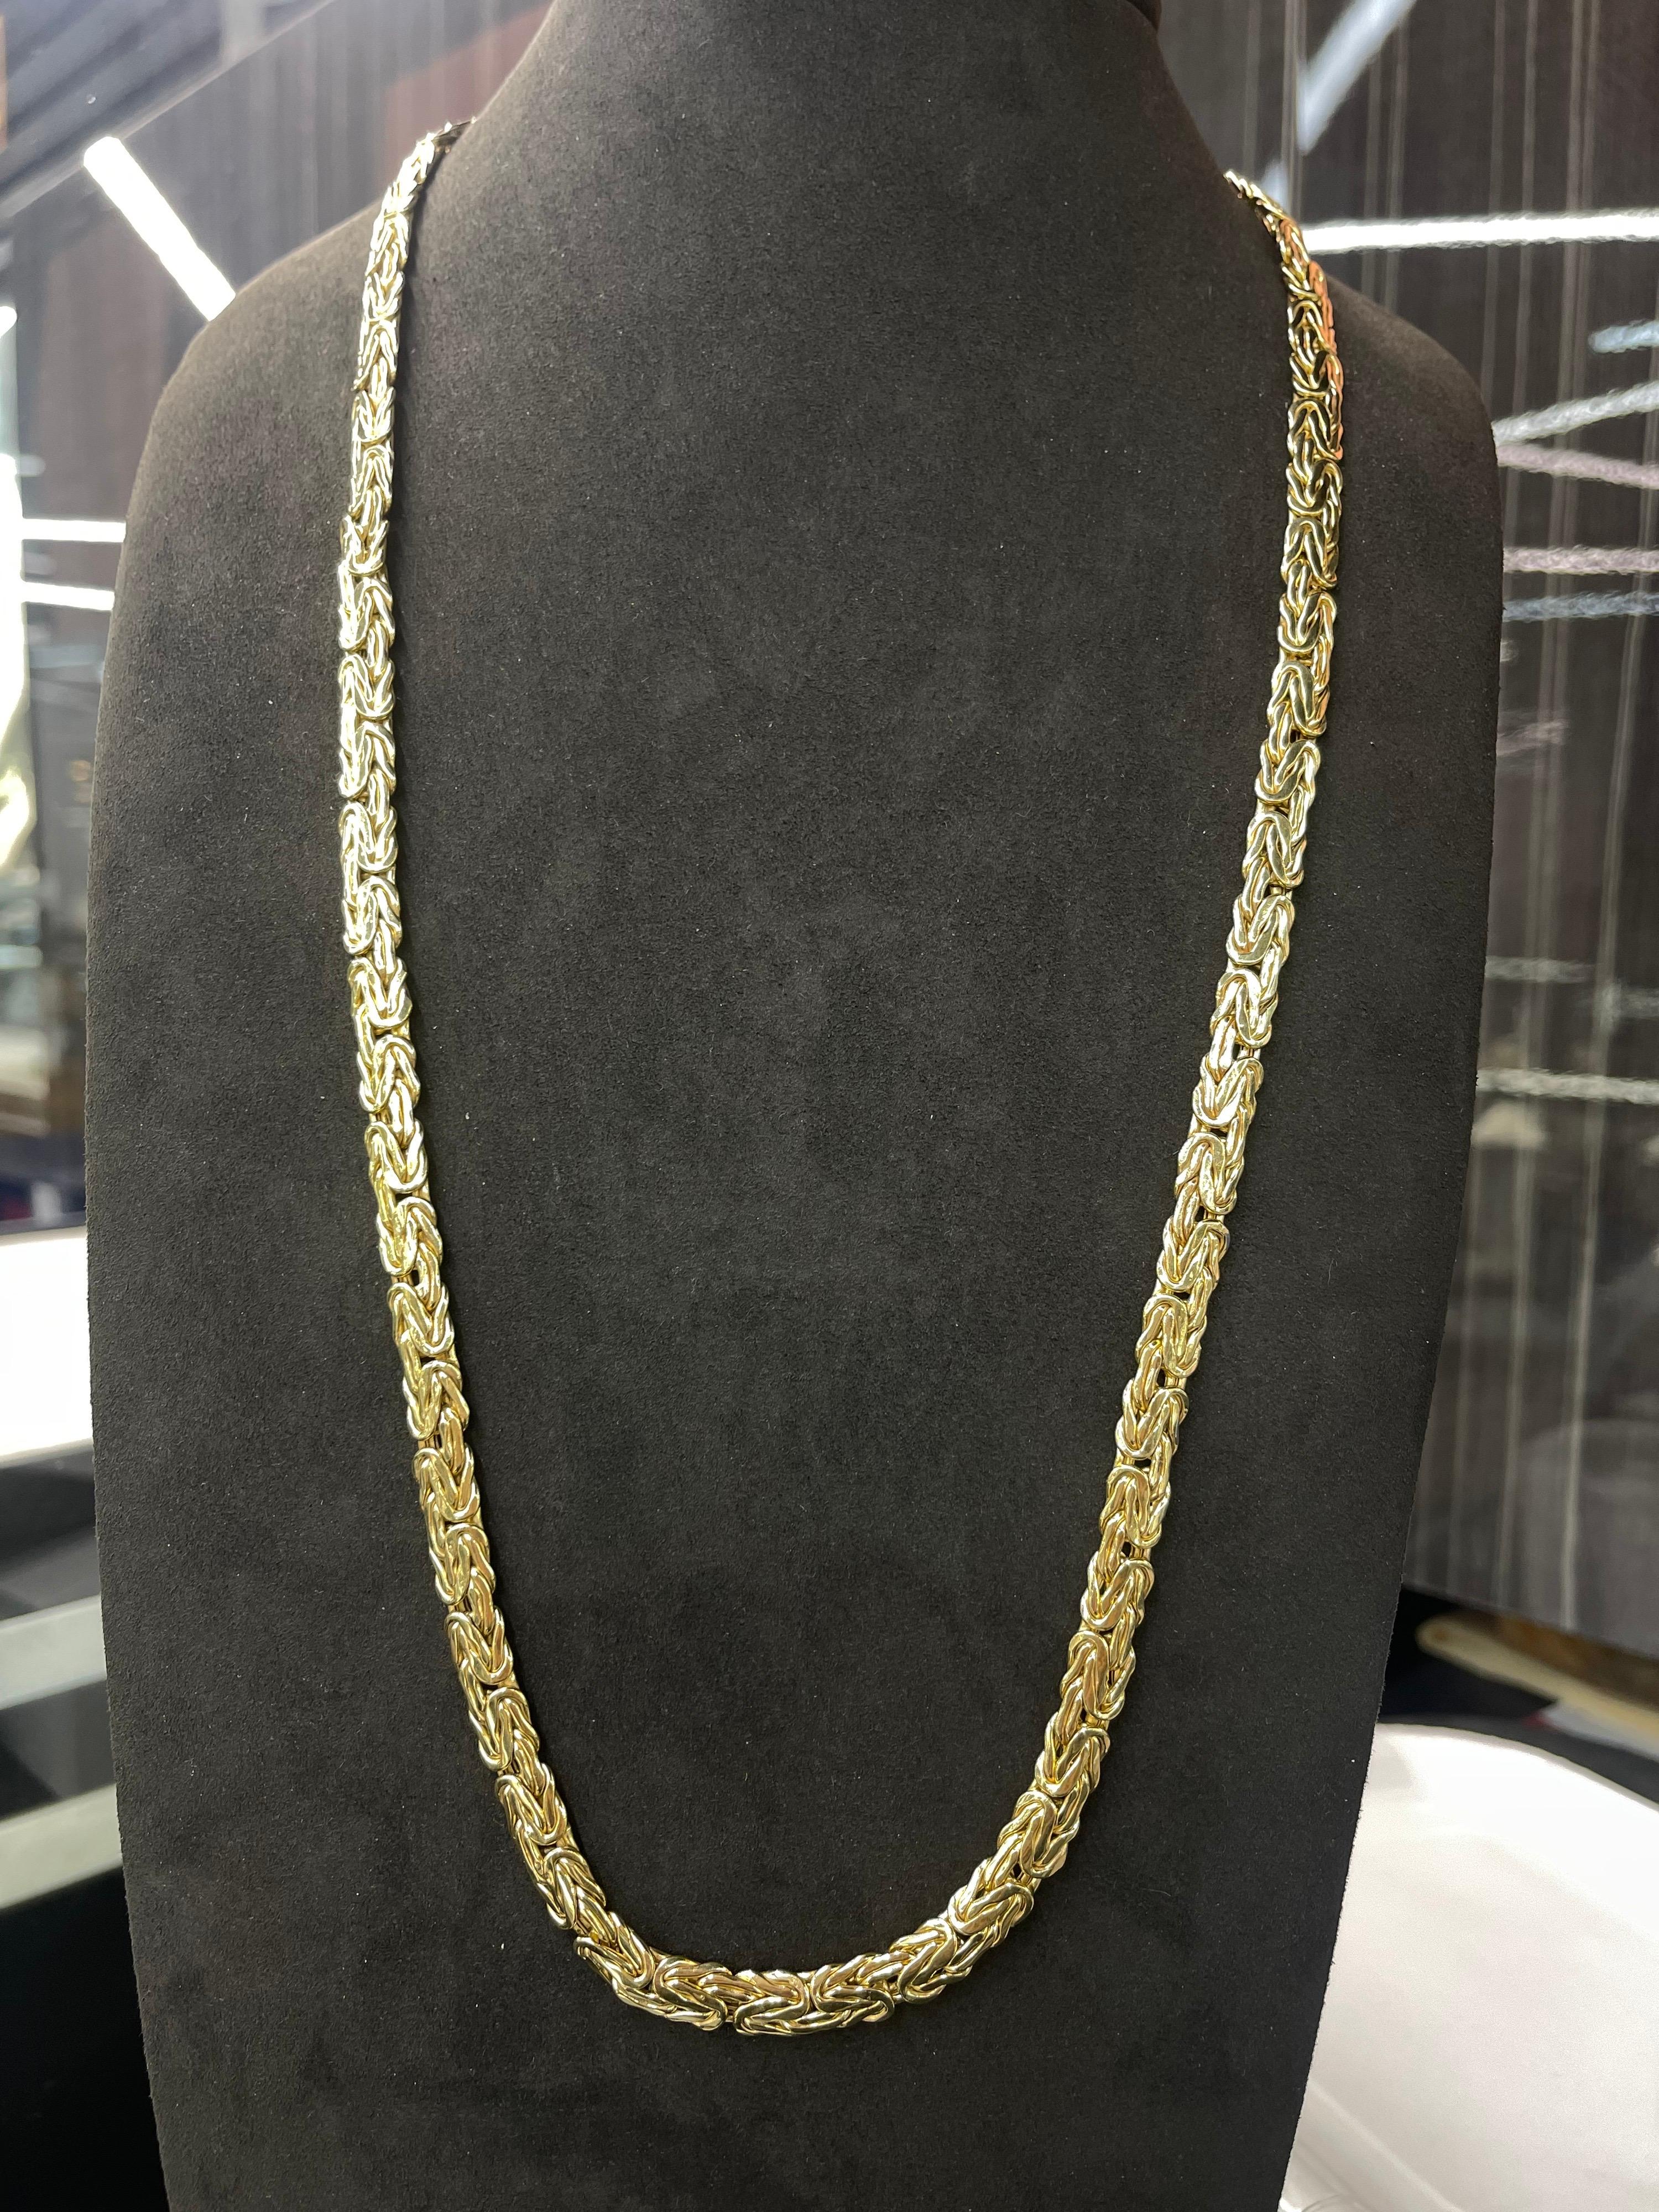 Interlocking Chain Gold Necklace 29 Inches 14 Karat Yellow Gold 54 Grams In Good Condition For Sale In New York, NY